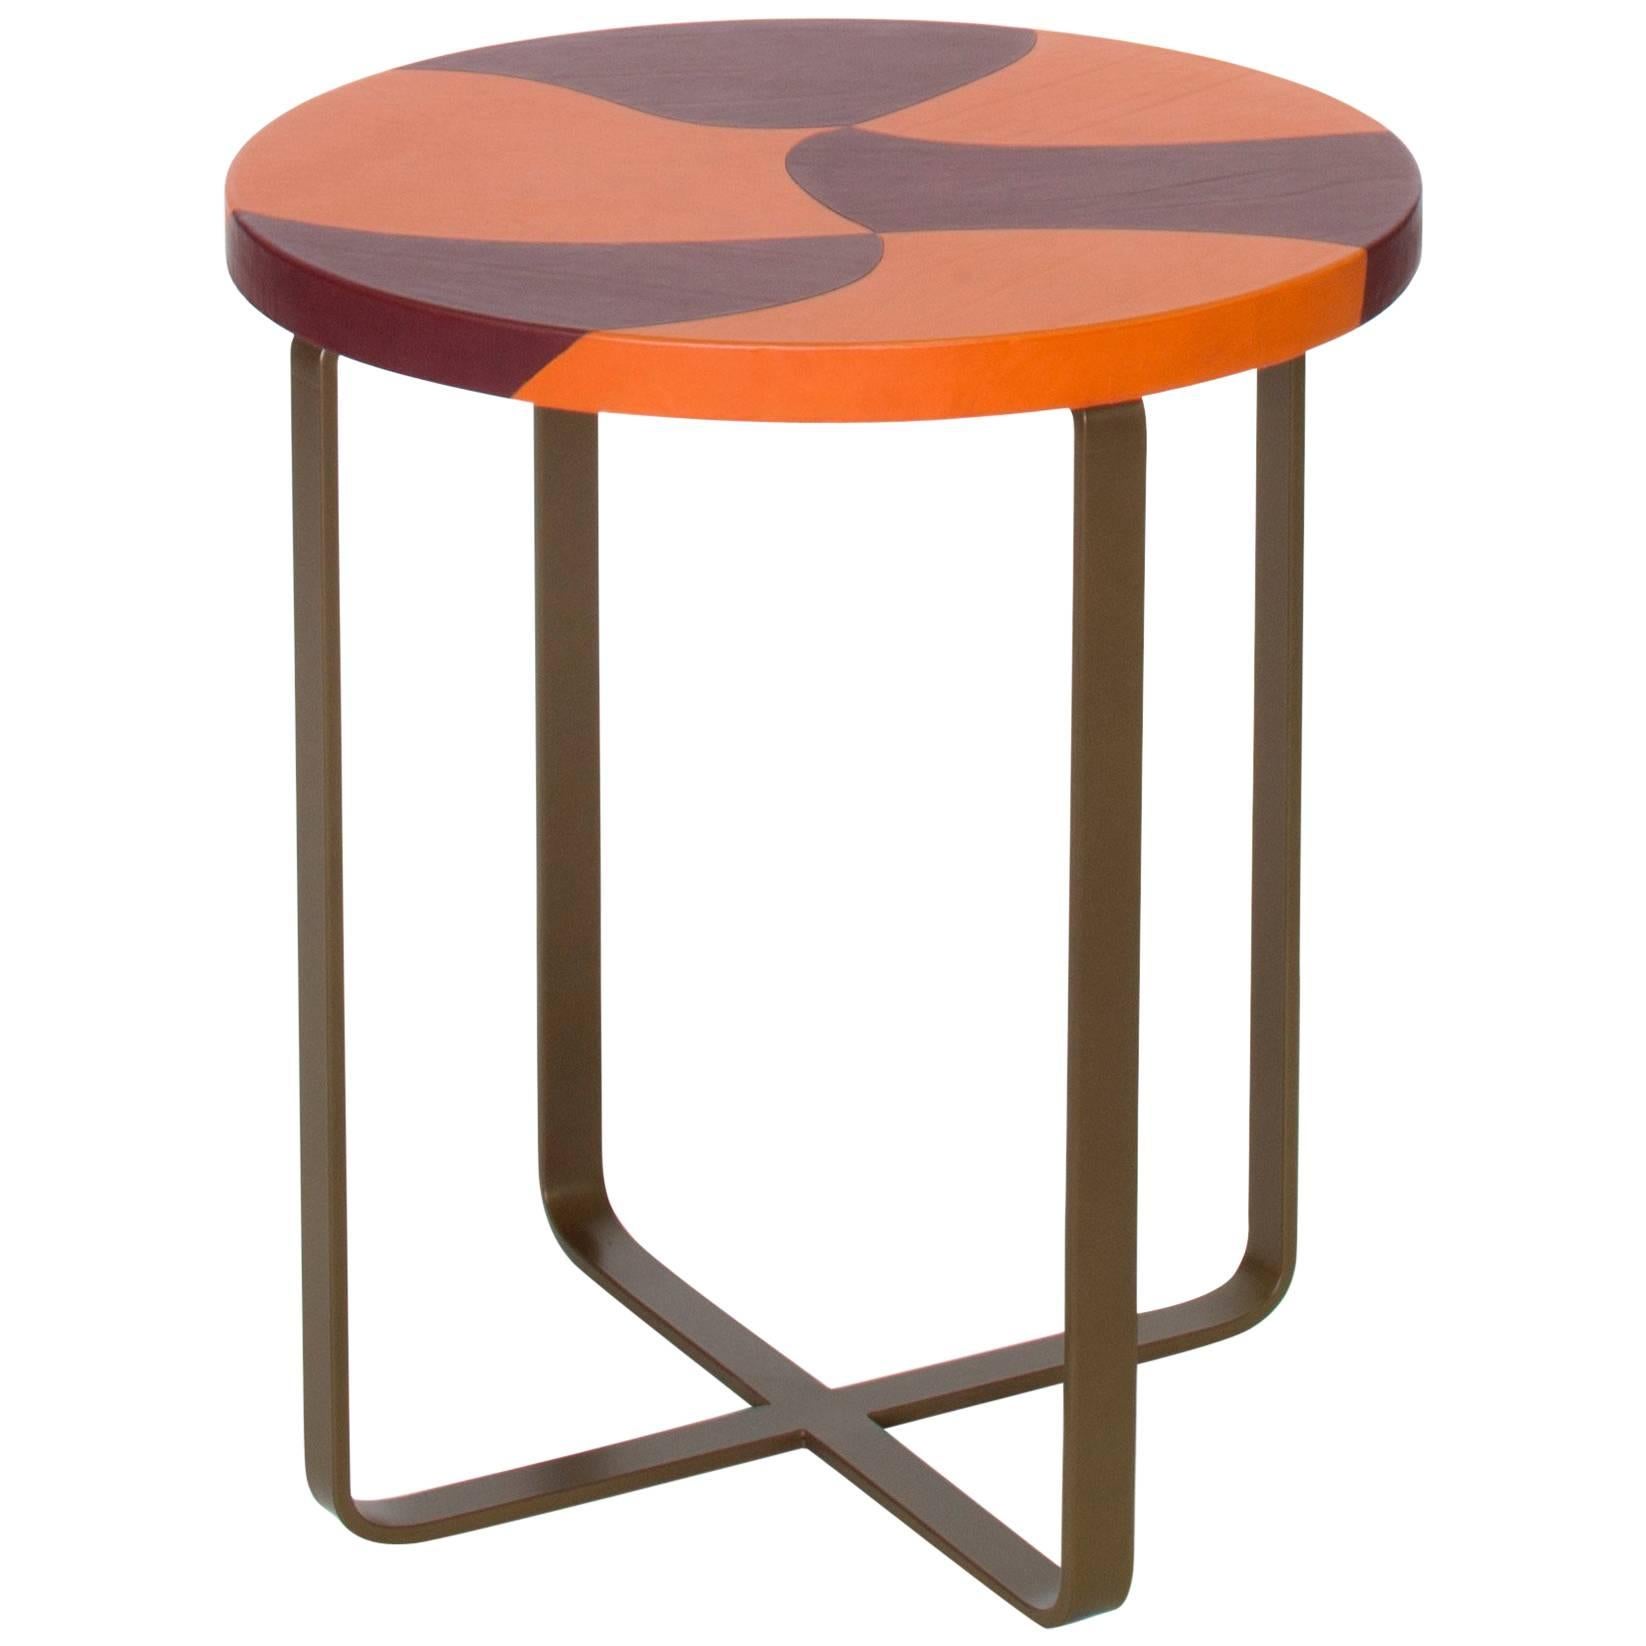 "Tiger" Inlaid Leather Top Side Table by Nestor Perkal for Oscar Maschera For Sale